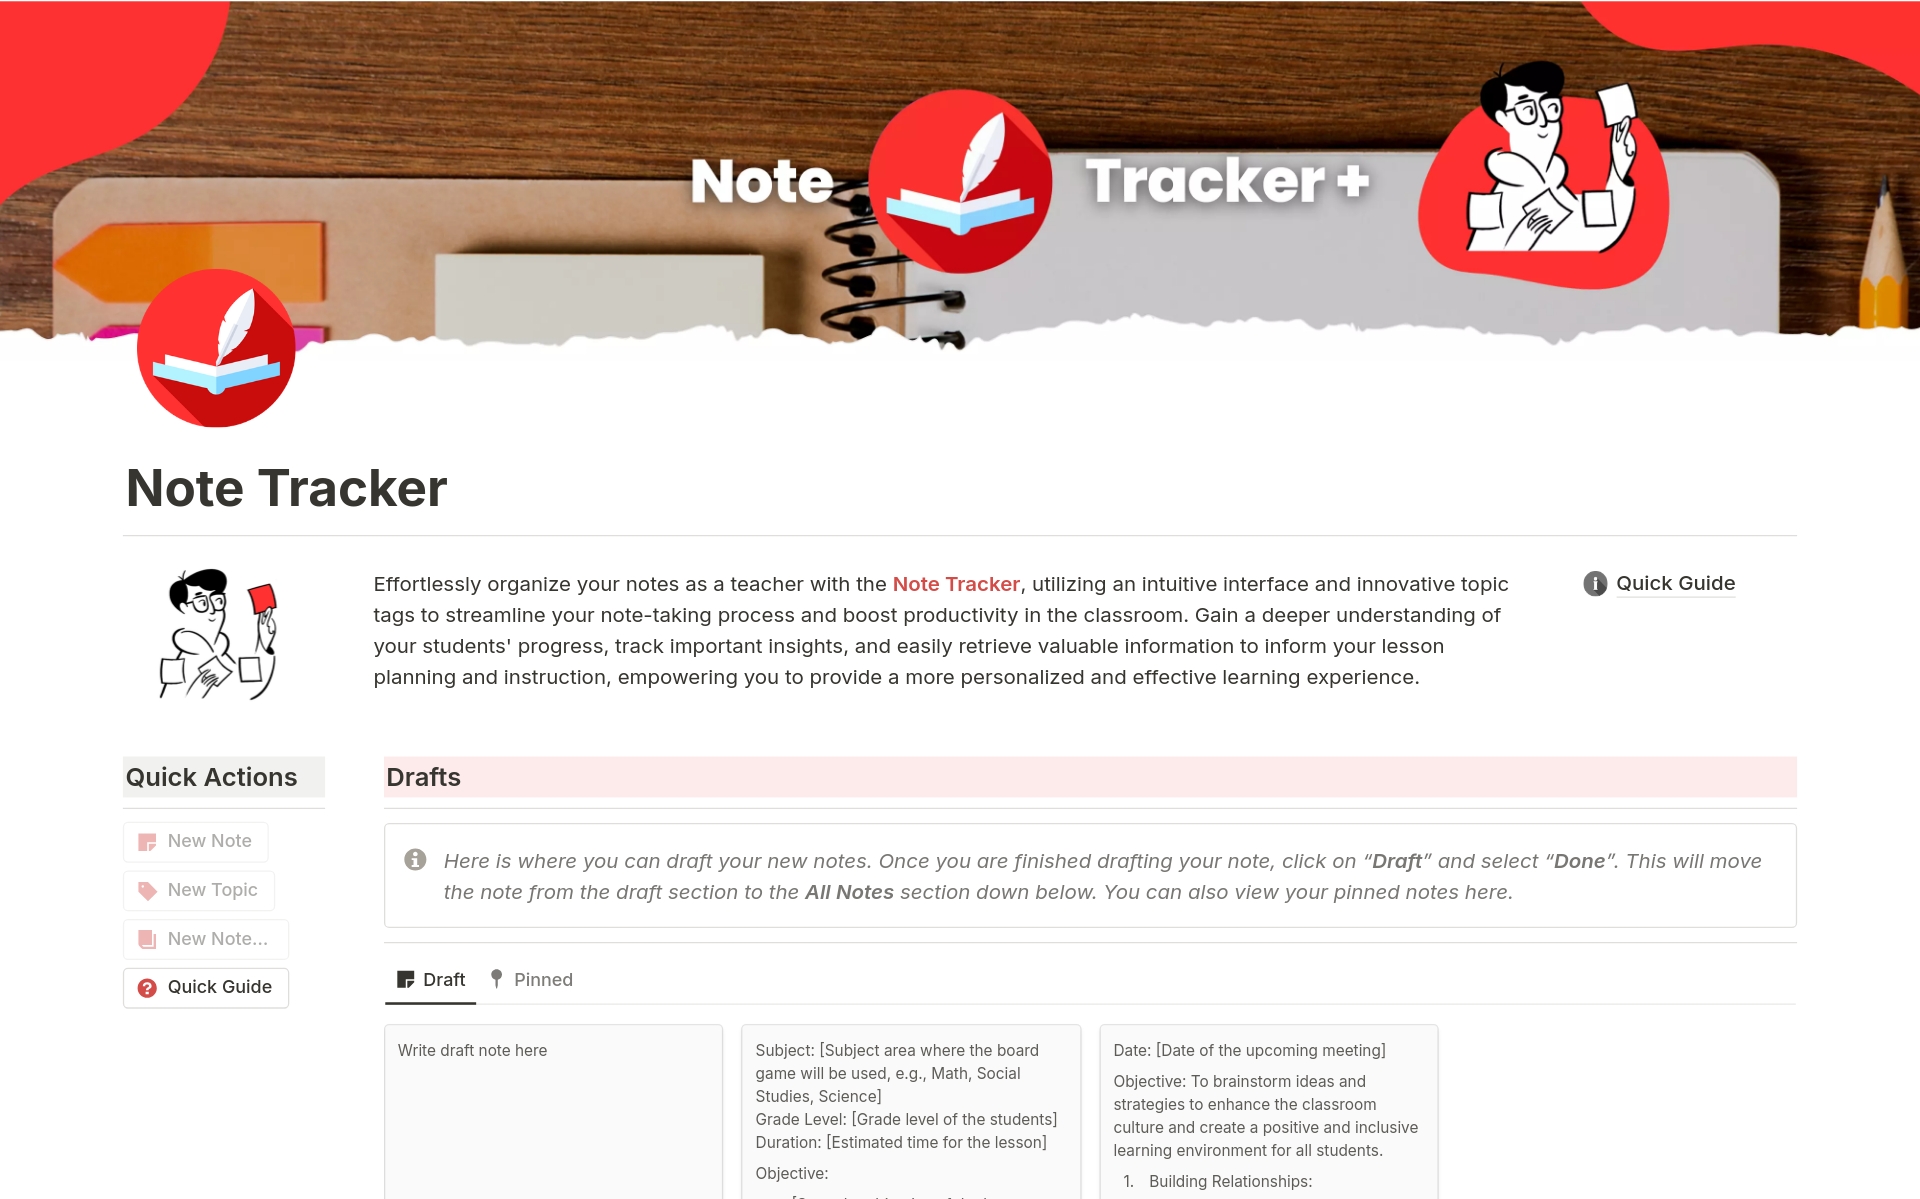 The Note Tracker empowers teachers to streamline their note-taking process, saving valuable time and ensuring easy access to organized notes for enhanced productivity.